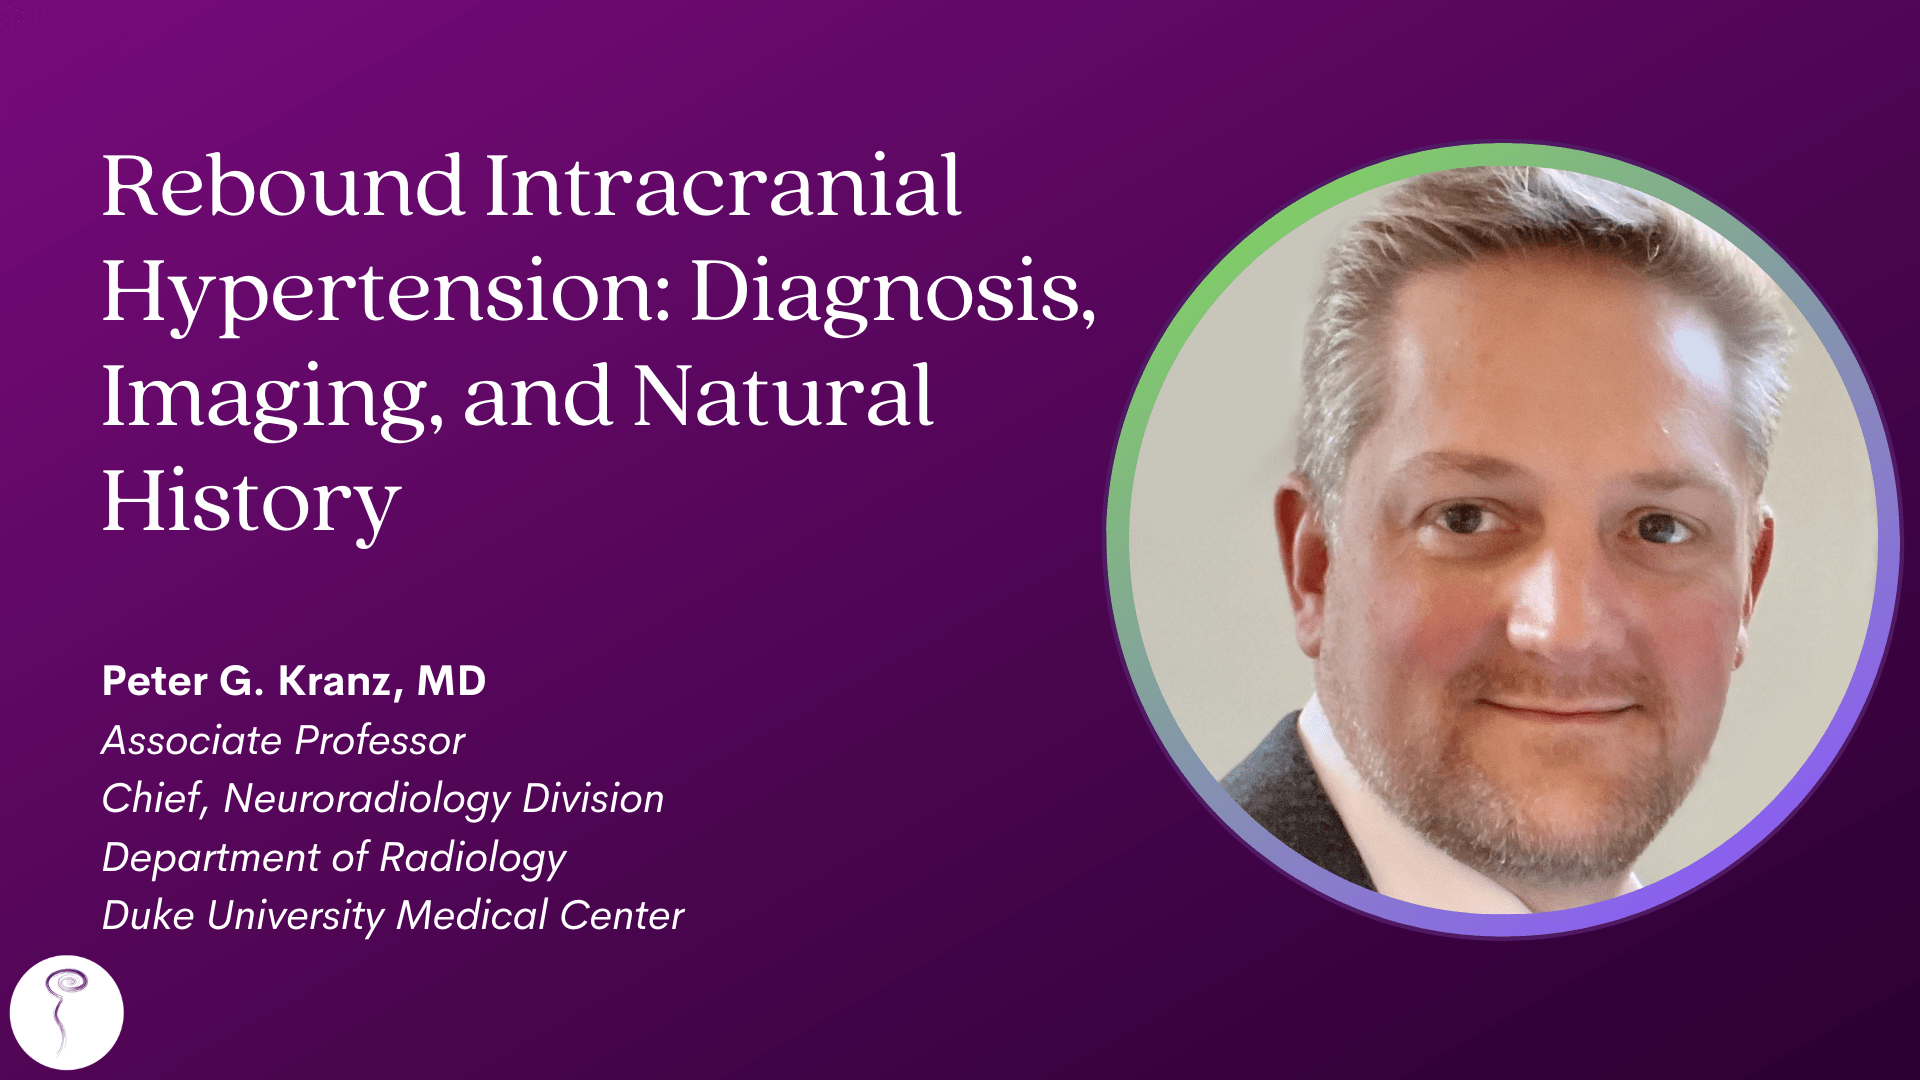 2023 Intracranial Hypotension Conference: Dr. Peter Kranz on RIH